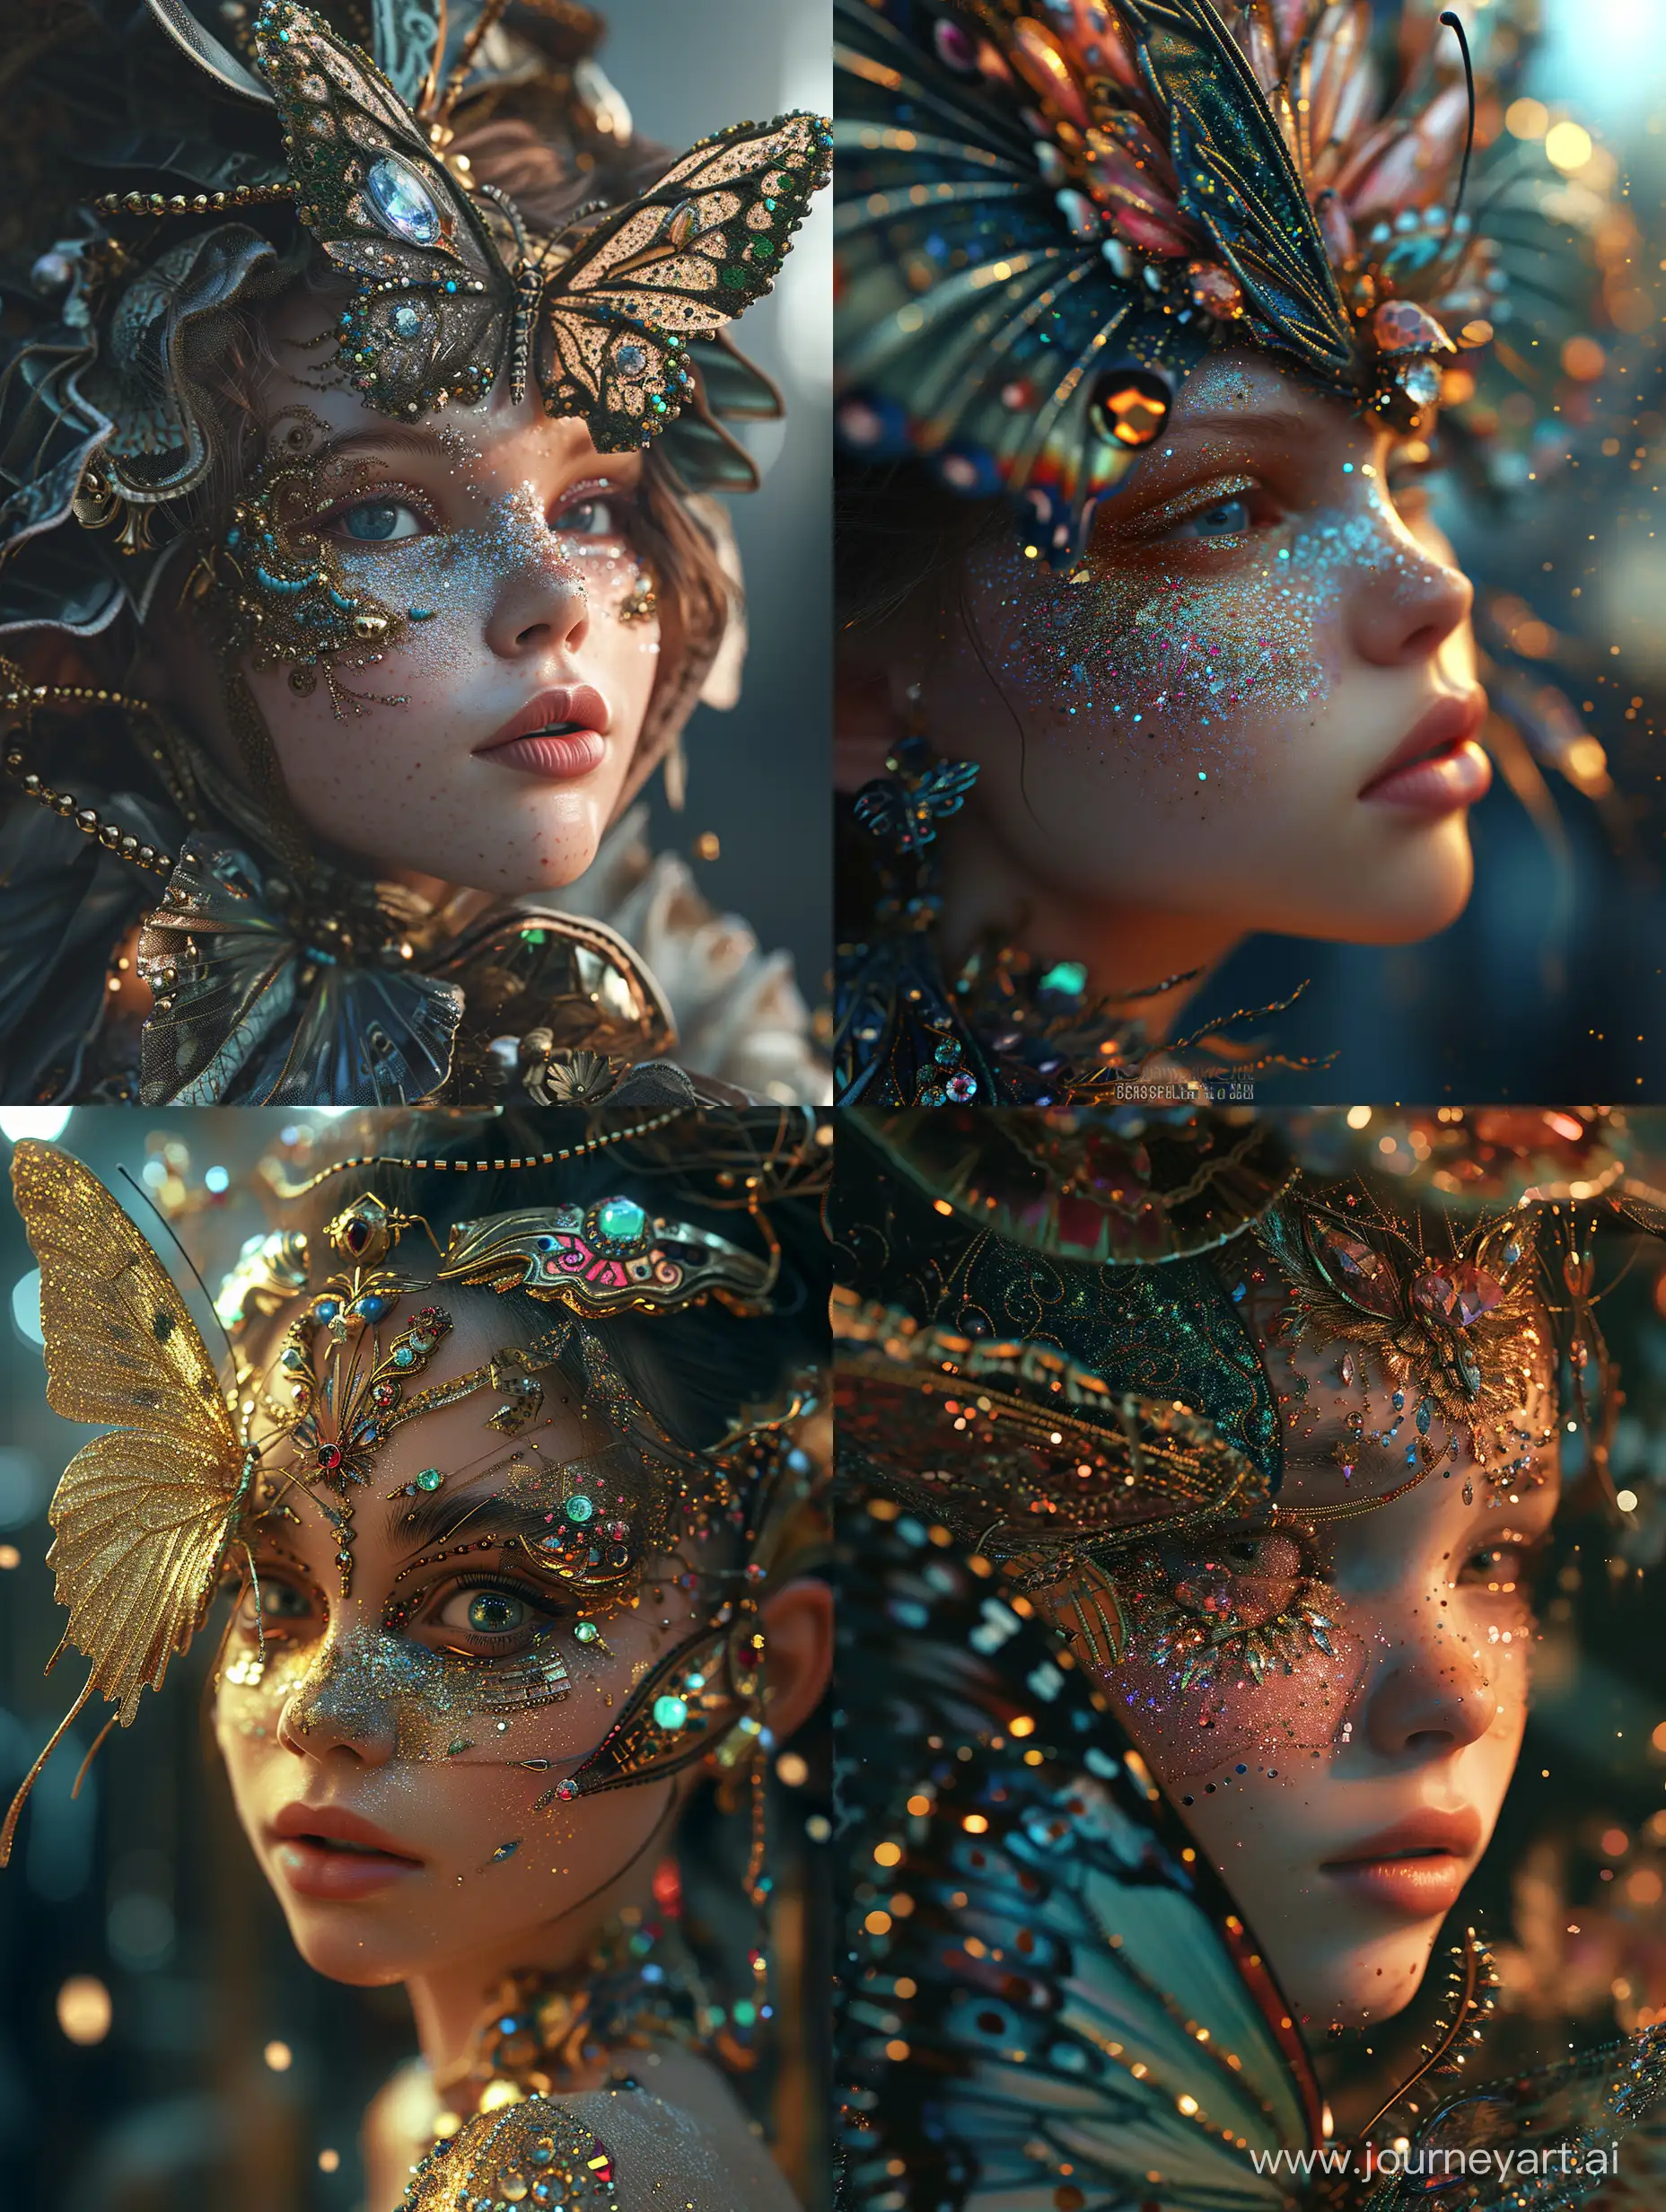 Exquisite-HyperMaximalist-Portrait-Girl-Transformed-with-Butterfly-Fantasy